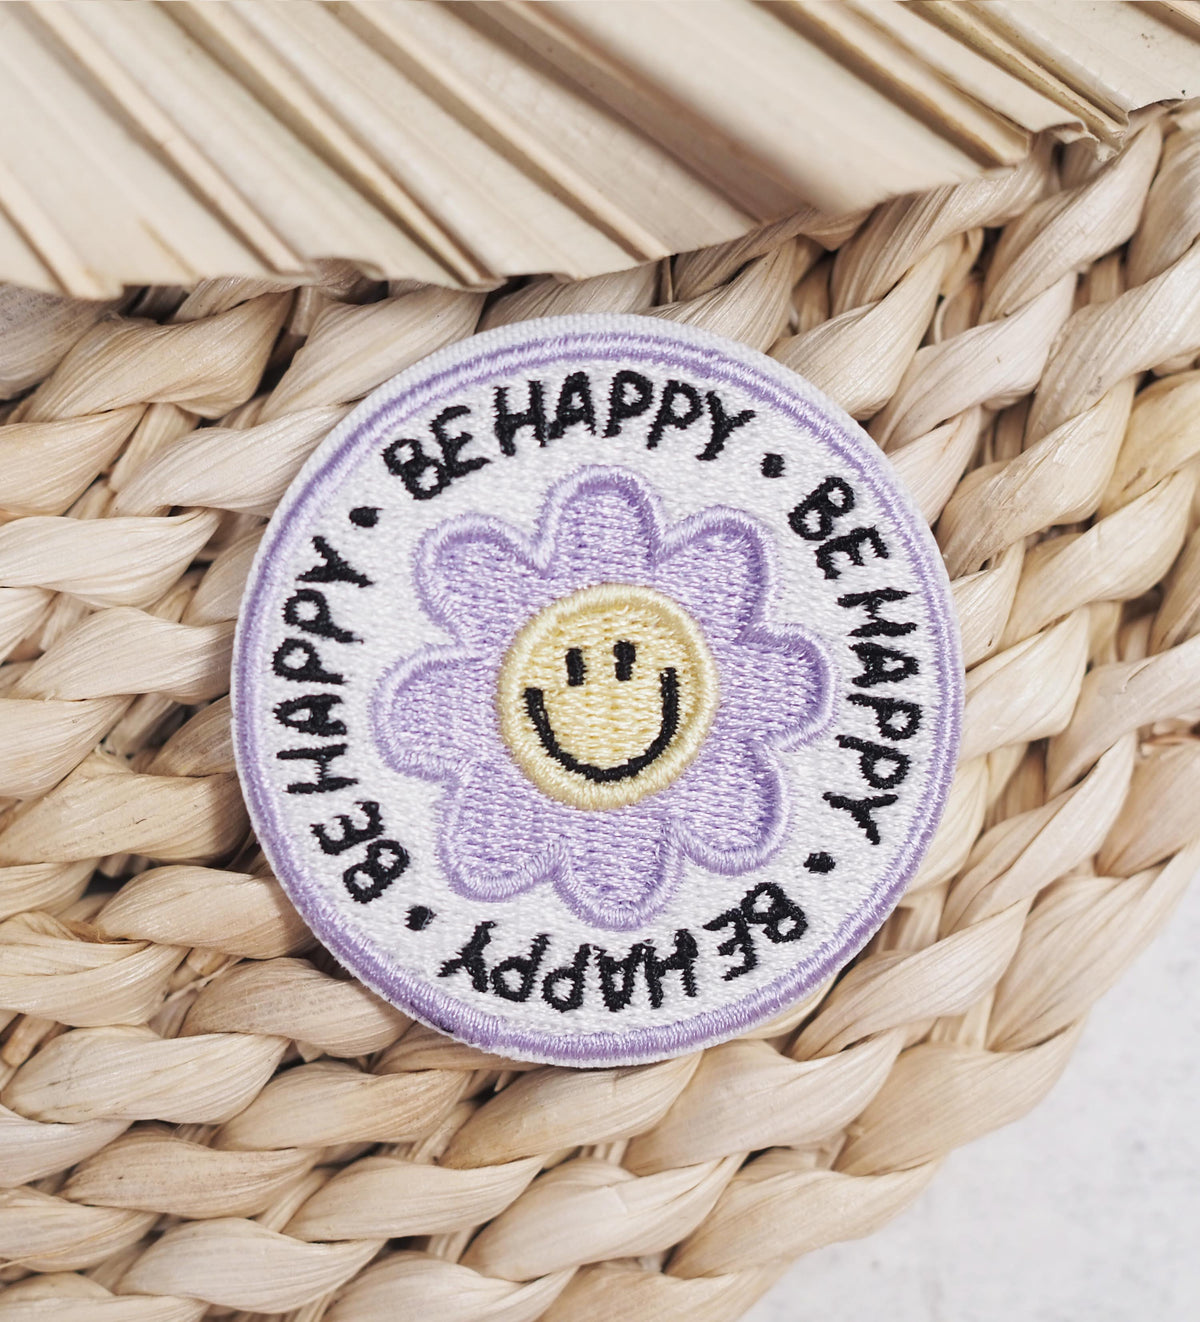 Patch - Blume - be happy *iron-on*